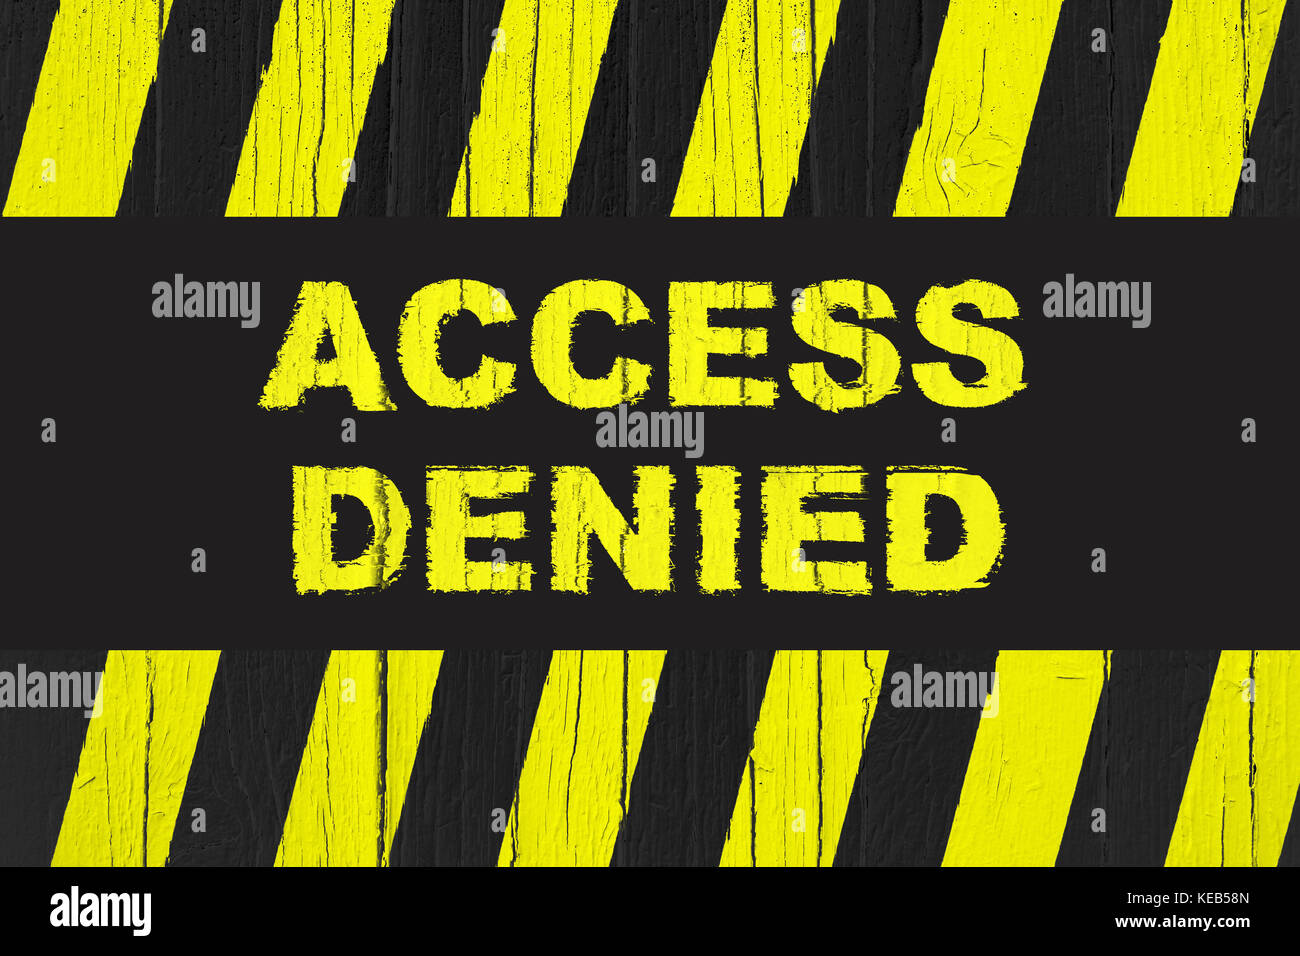 Access denied warning sign with yellow and black stripes painted over cracked wood. Sign usually used with meaning: do not enter the area, caution, da Stock Photo